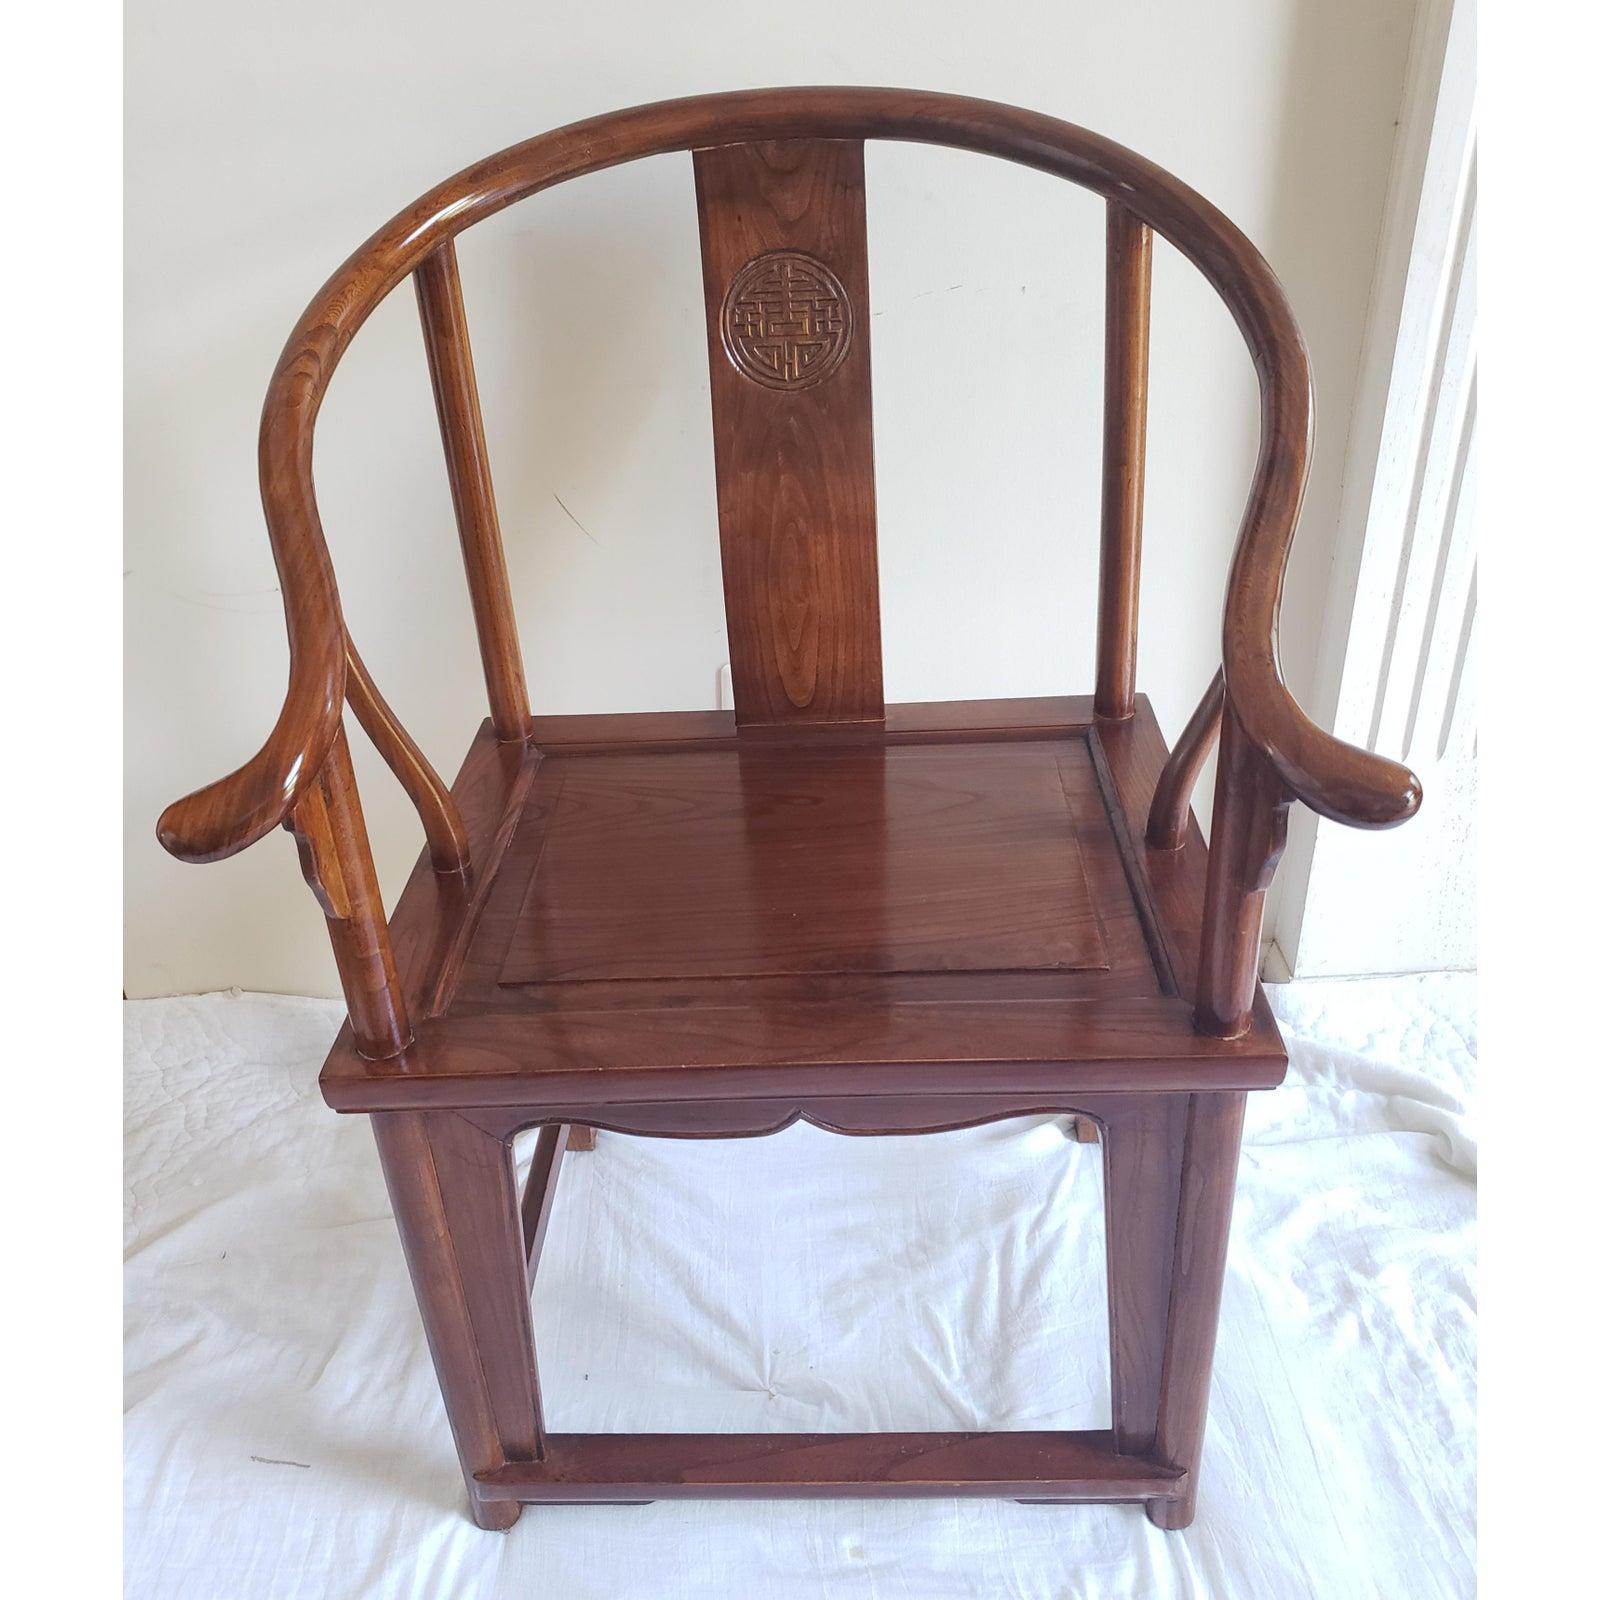 For your consideration is Pair of rosewood horseshoe chairs.
Chairs are in good condition.
They measure 23